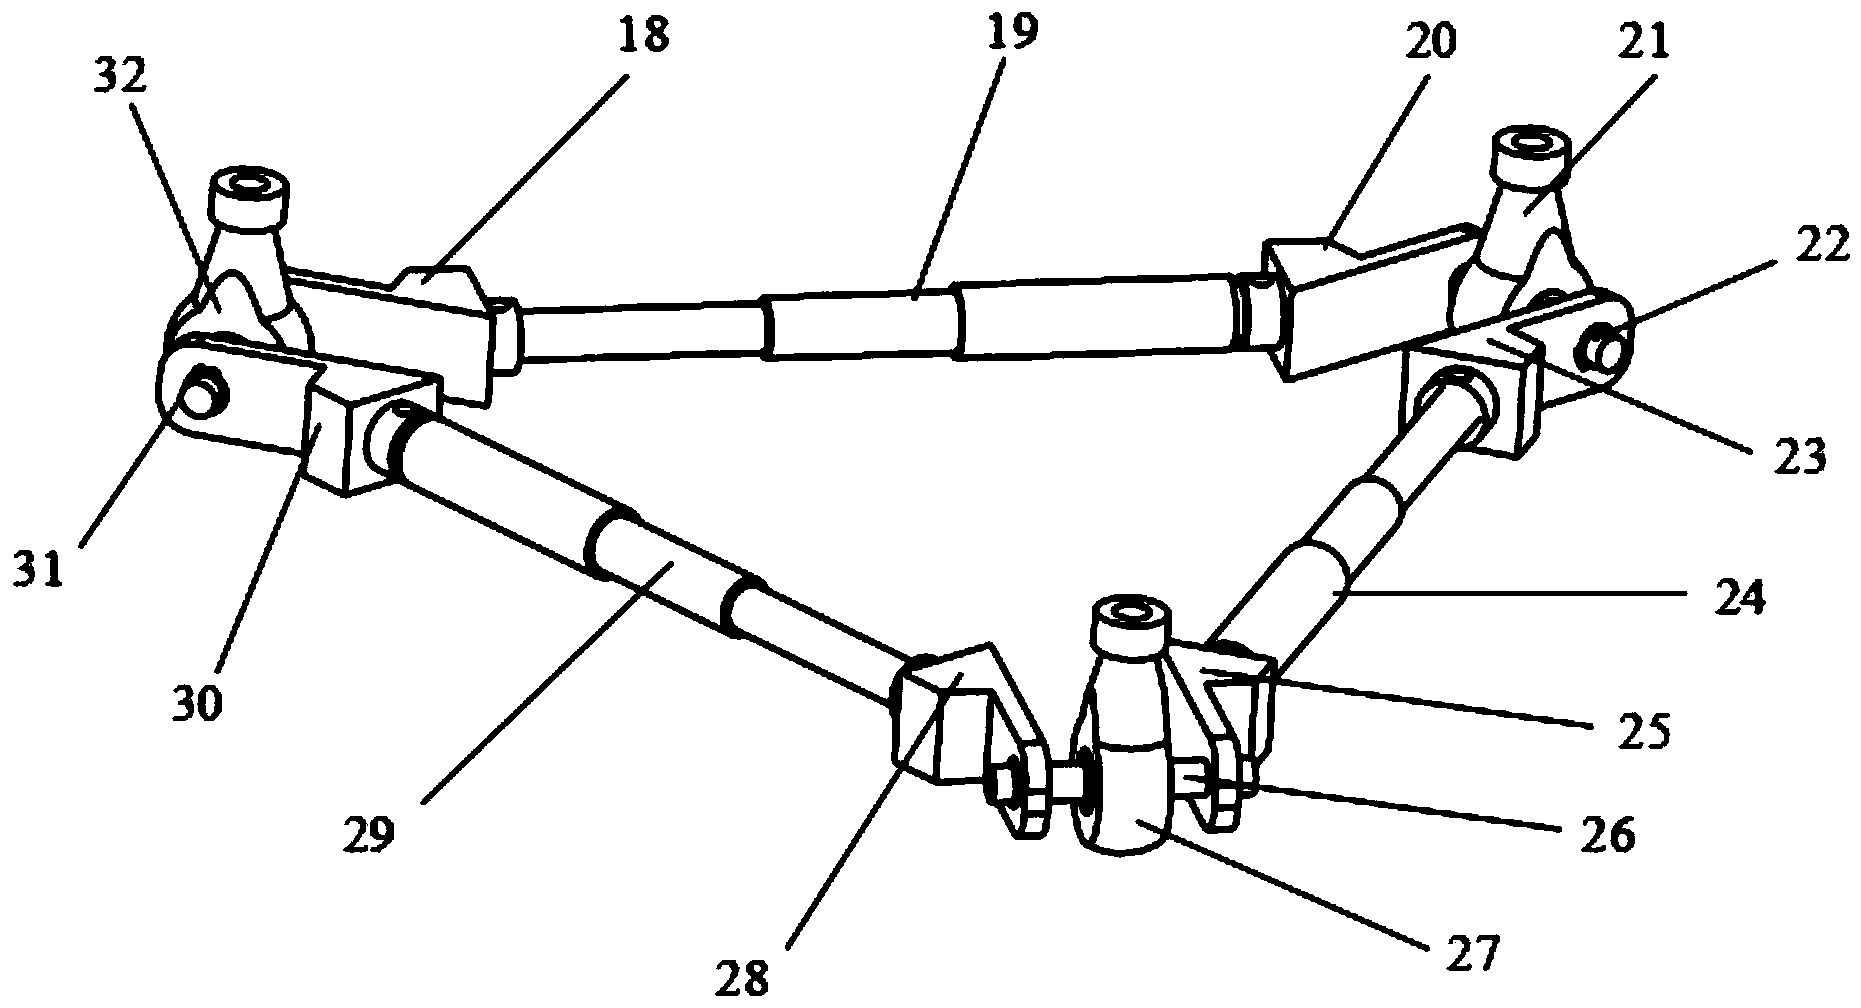 Telescopic and insertable moving mechanism